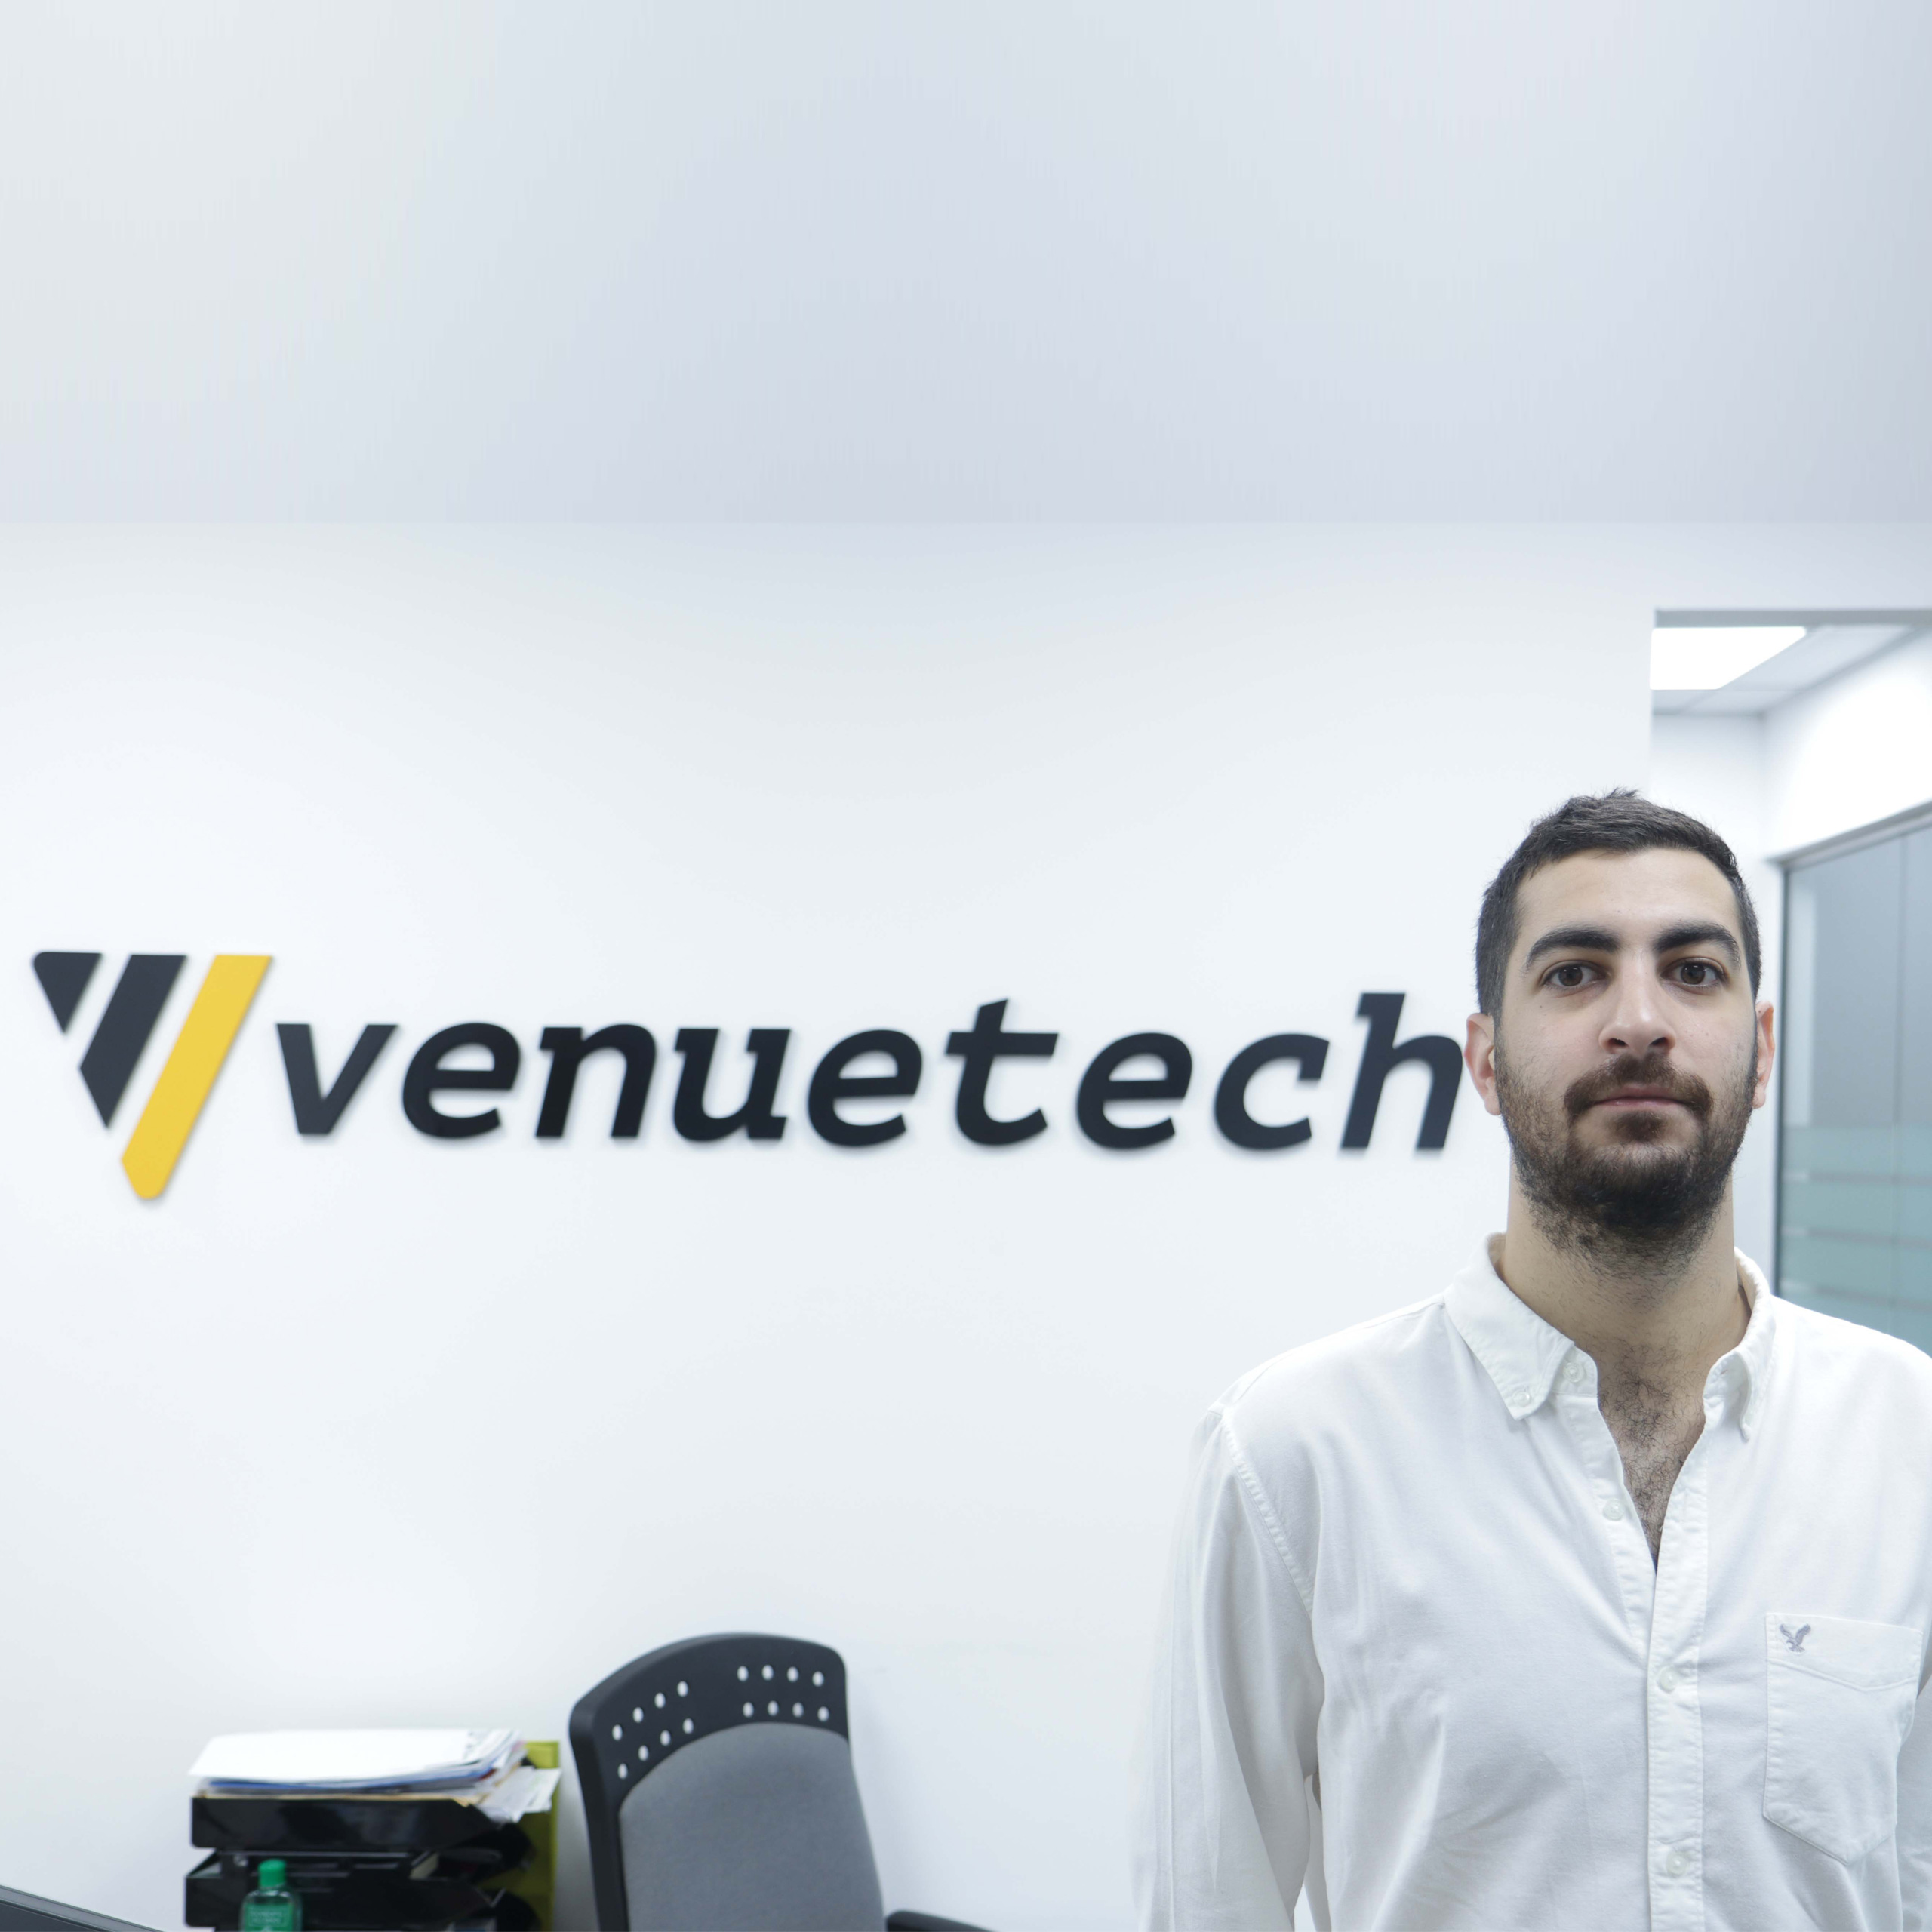 Prolight + Sound Middle East-An interview with Ismat Assafari, Operations Manager at Venuetech